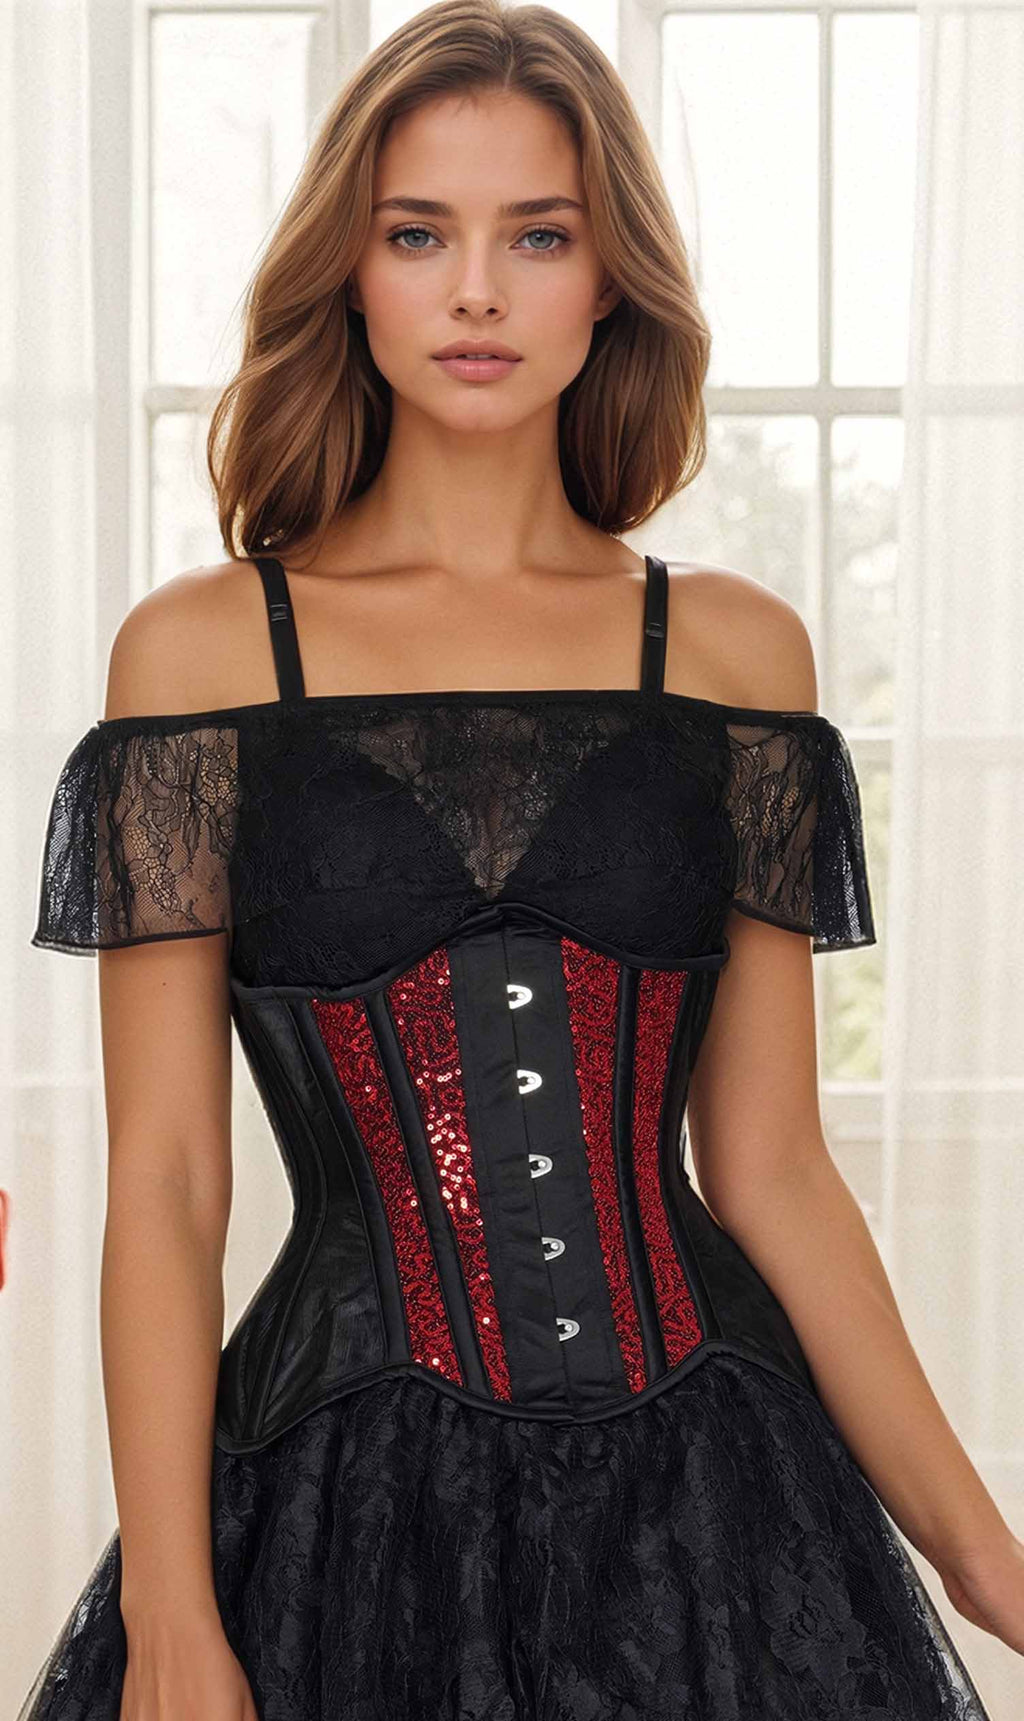 View the Bespoke Corsets & Plus Size Corset designs we have with us